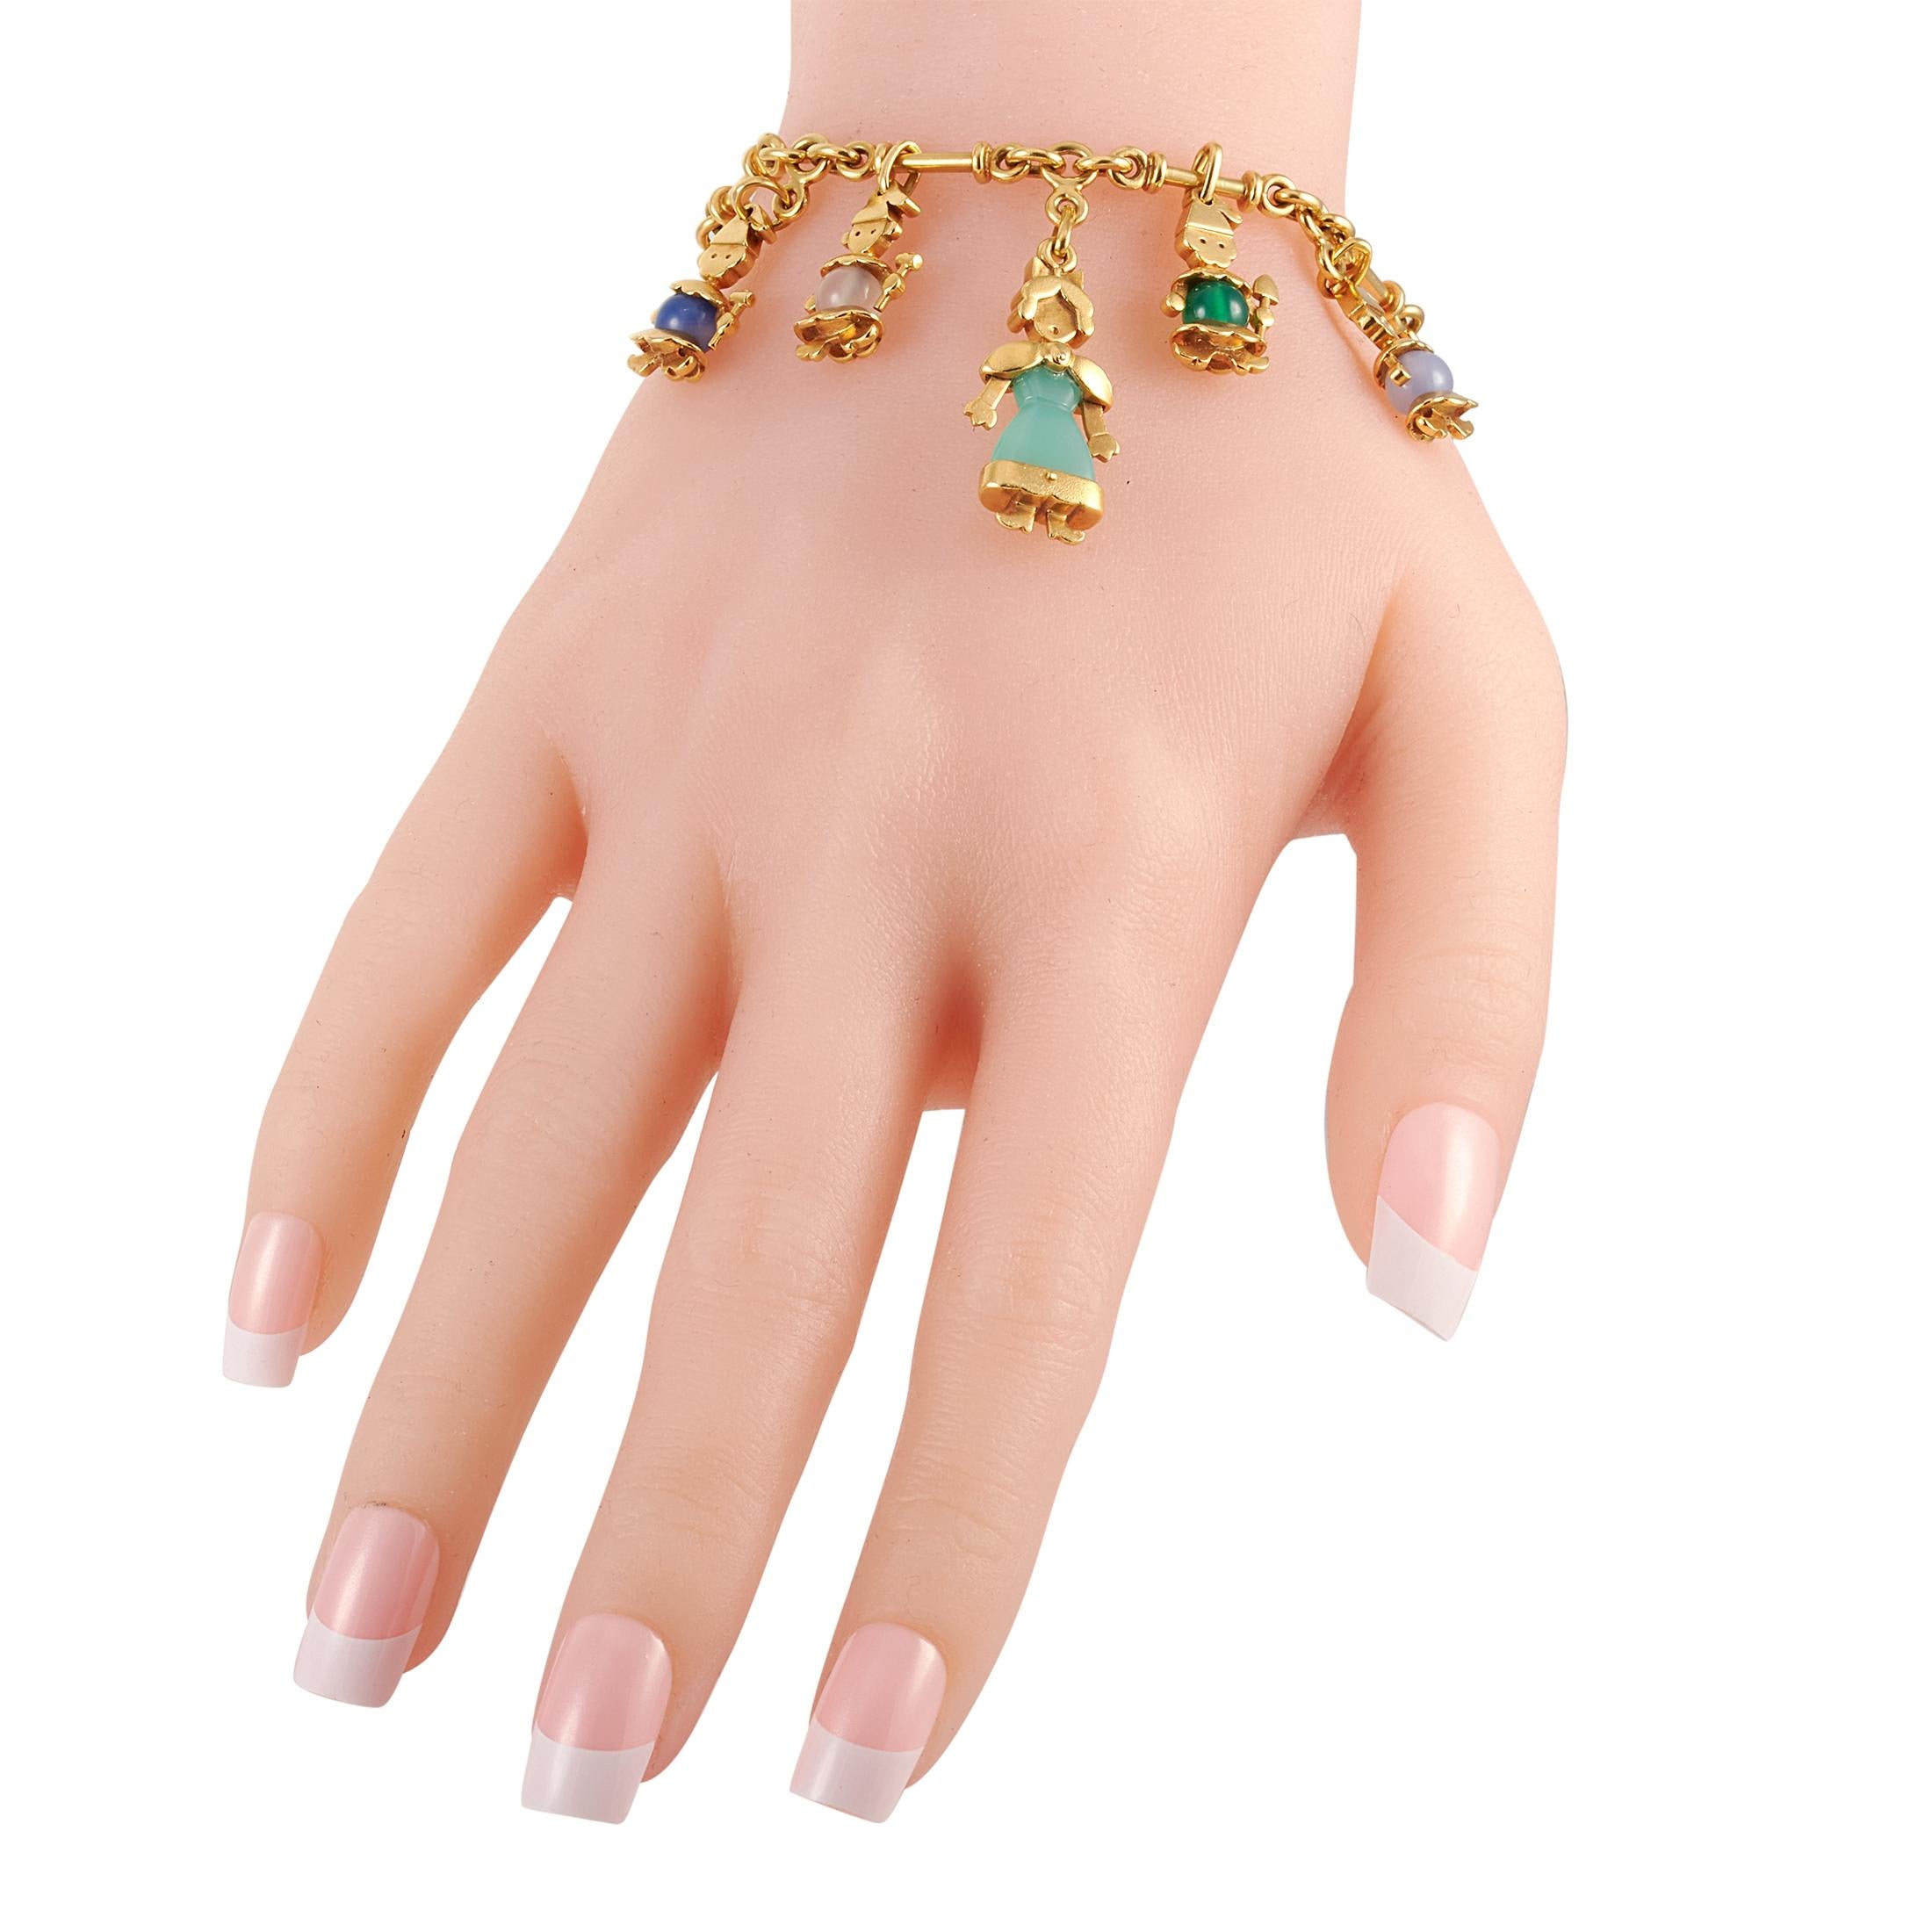 This Pomellato charm bracelet with Snow White and The Seven Dwarfs motifs is made of 18K yellow gold and features eight differently colored chalcedony stones. The bracelet weighs 45 grams and measures 7” in length.
 
 Offered in estate condition,